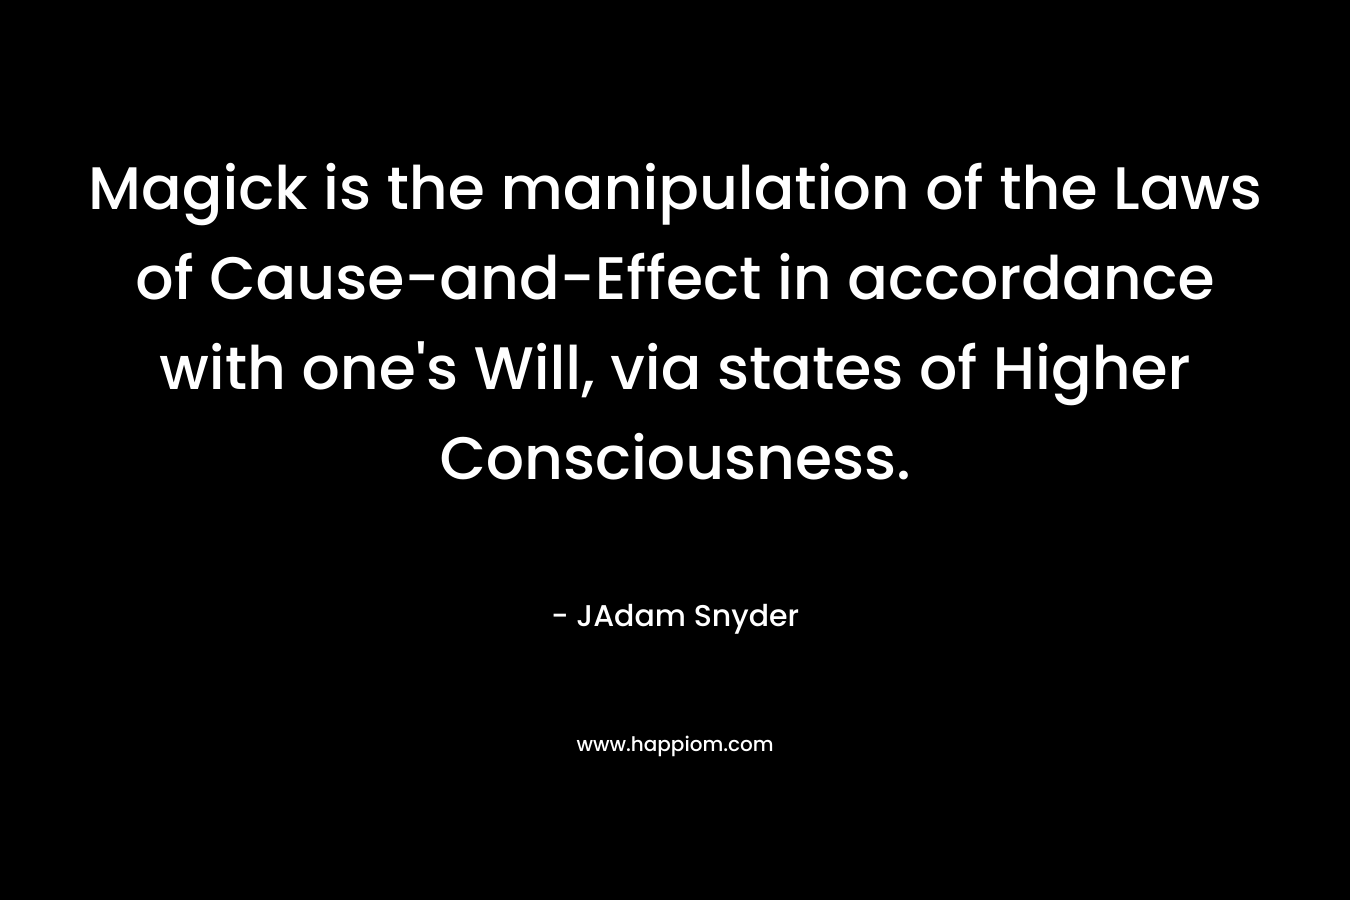 Magick is the manipulation of the Laws of Cause-and-Effect in accordance with one's Will, via states of Higher Consciousness.